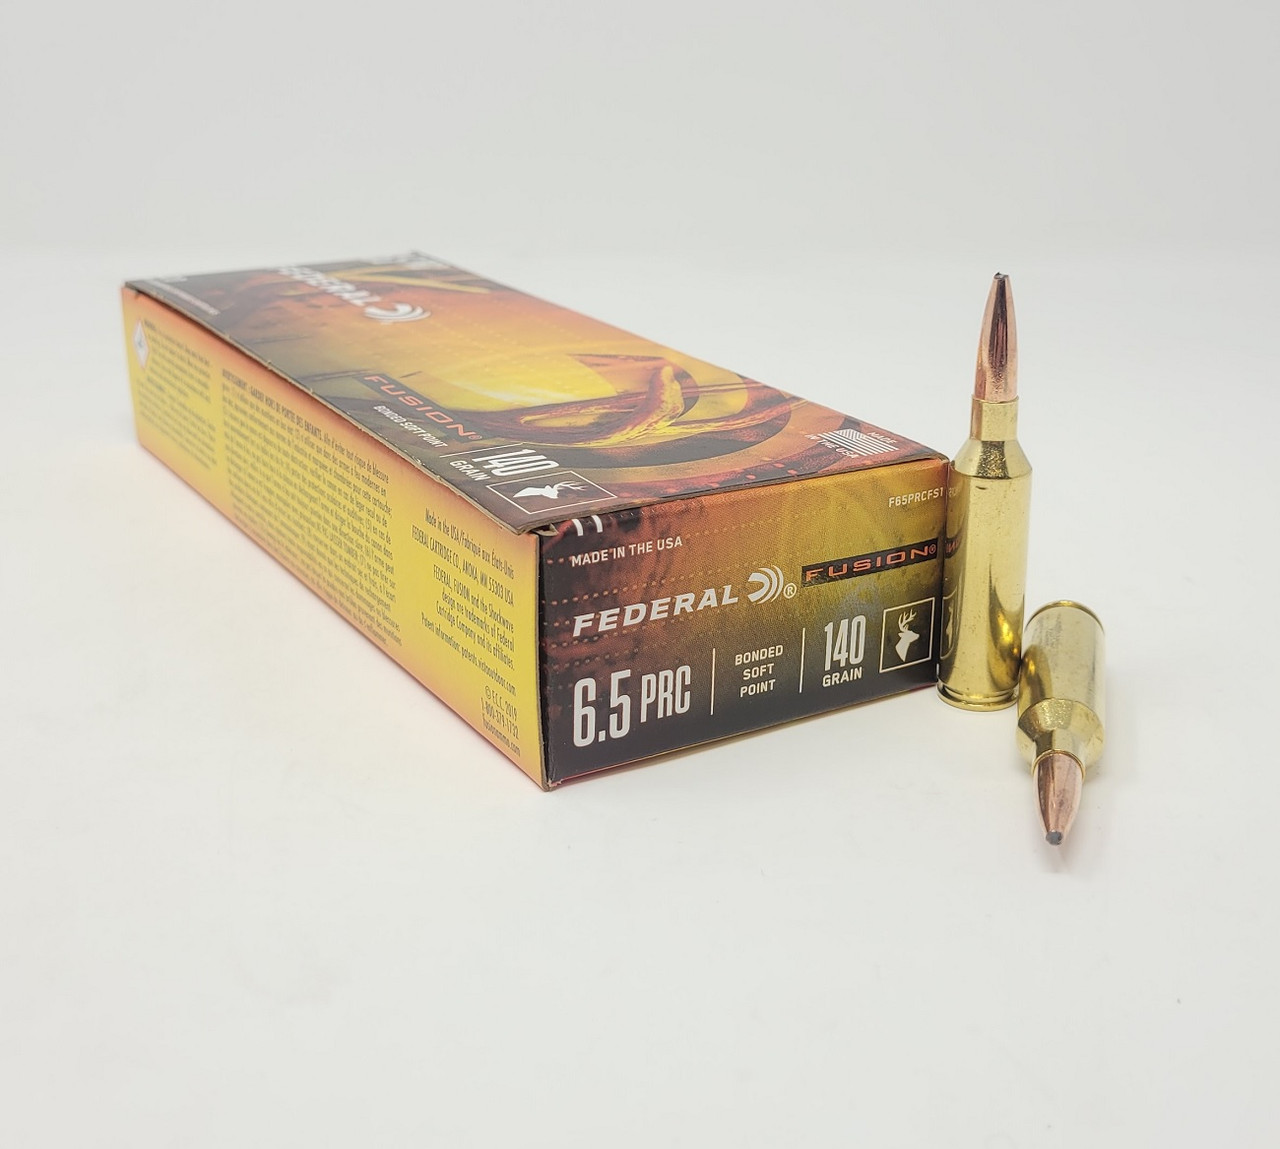 Federal Fusion Bonded SP Ammo